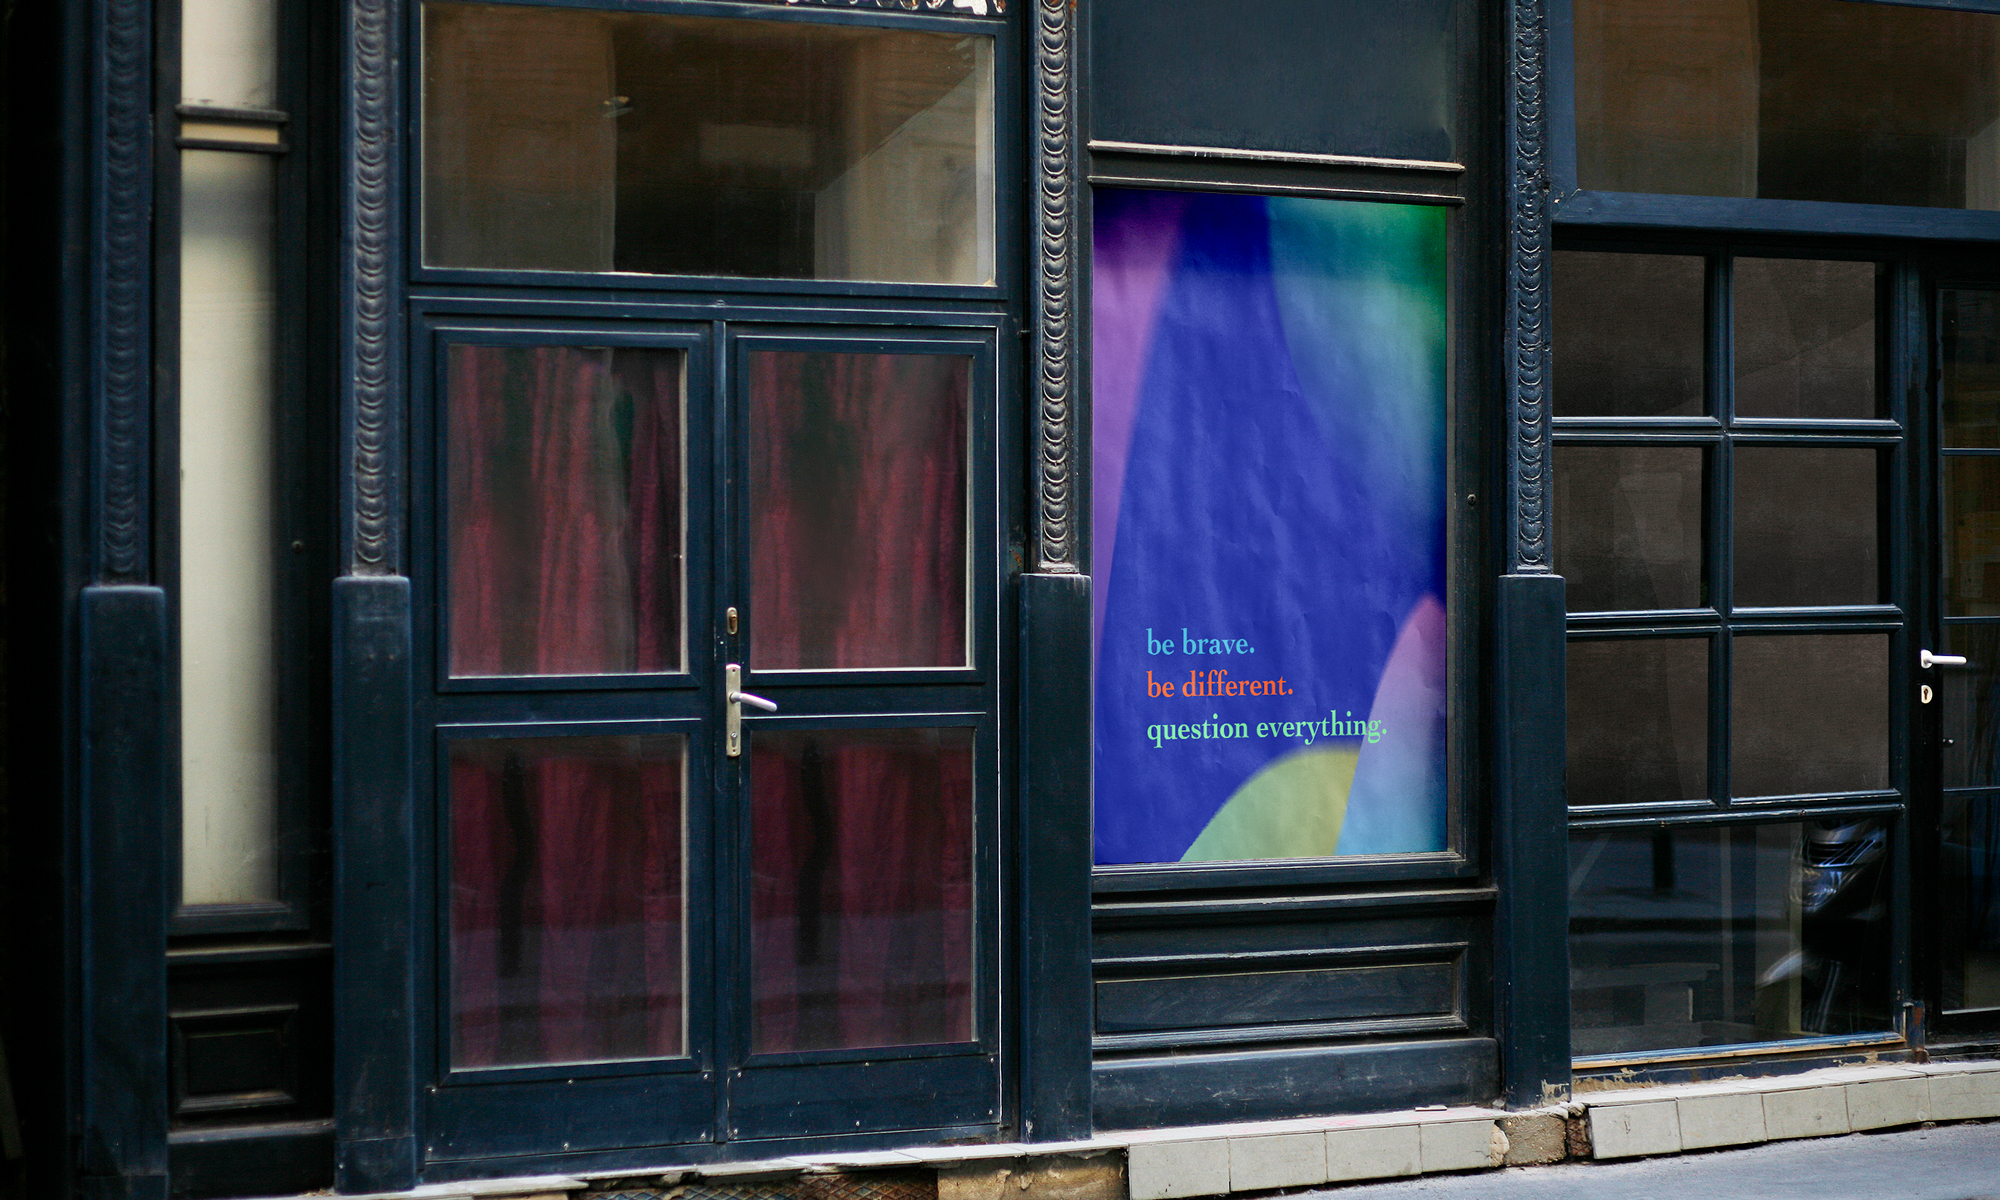 Street view with a poster on which identity is placed on